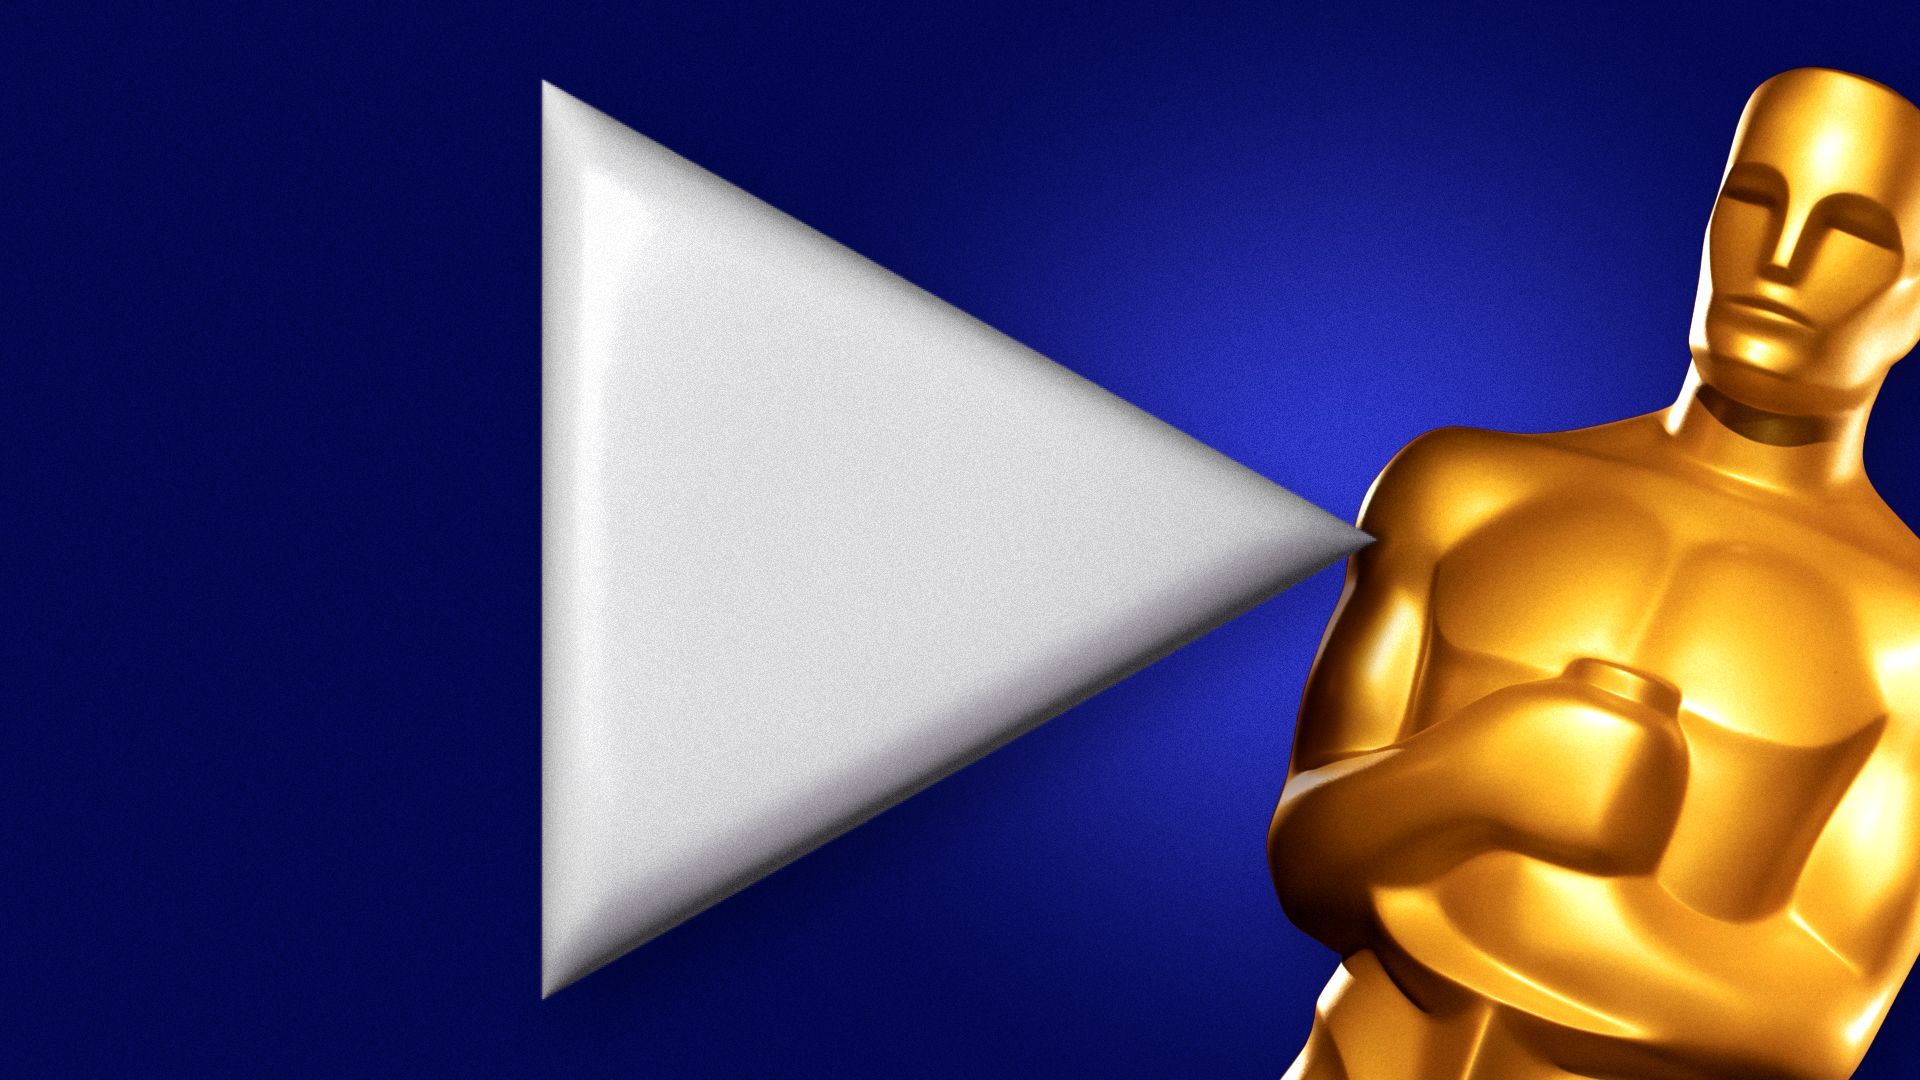 Illustration of a play icon pushing an Oscar statuette off the screen.